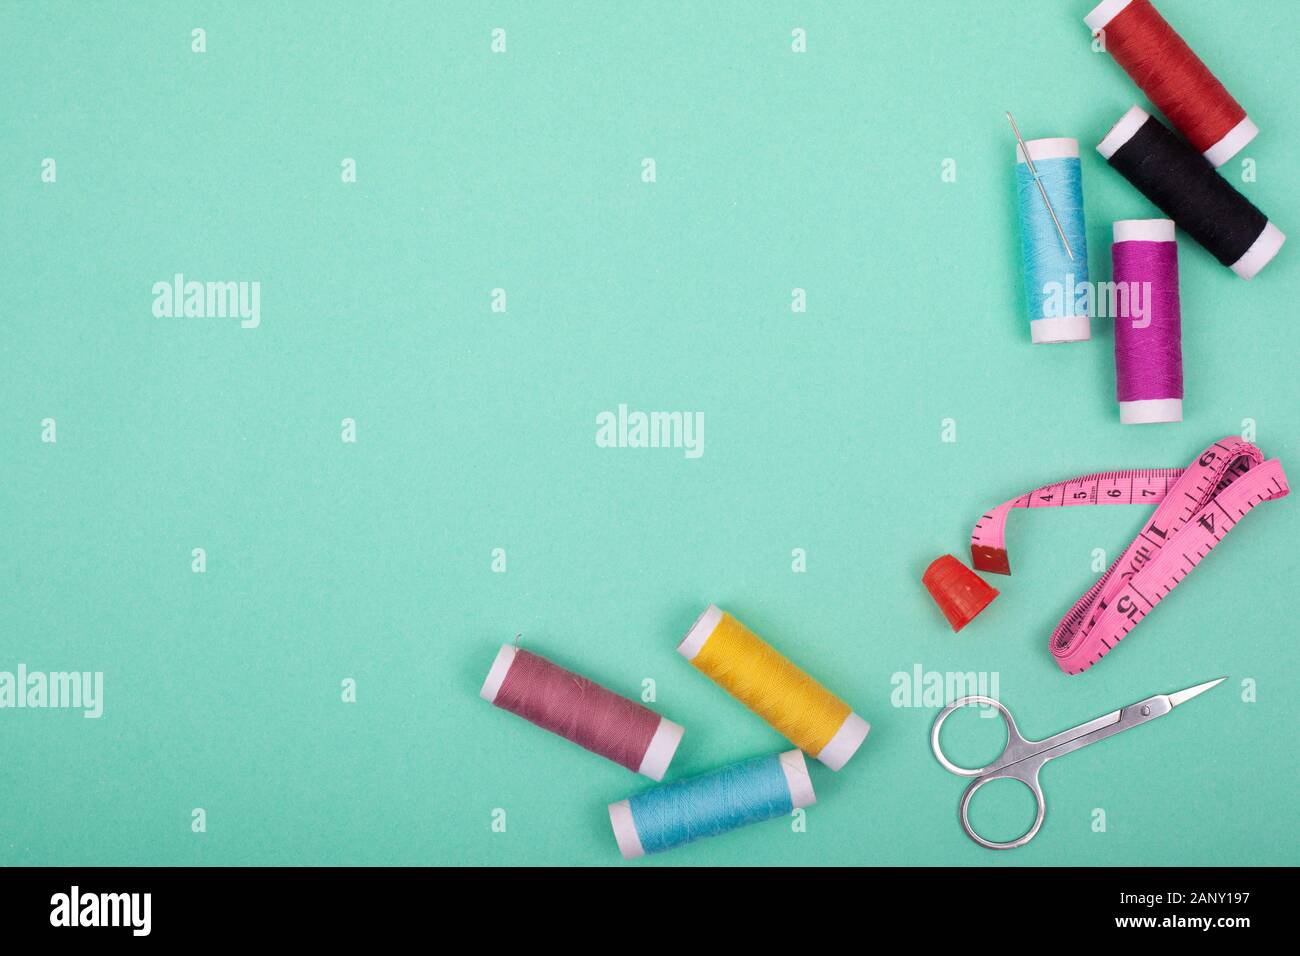 Sewing kit  tools for tailoring and colorful  threads,needles,pins,scissors on mint background mockup frame top view  Stock Photo - Alamy